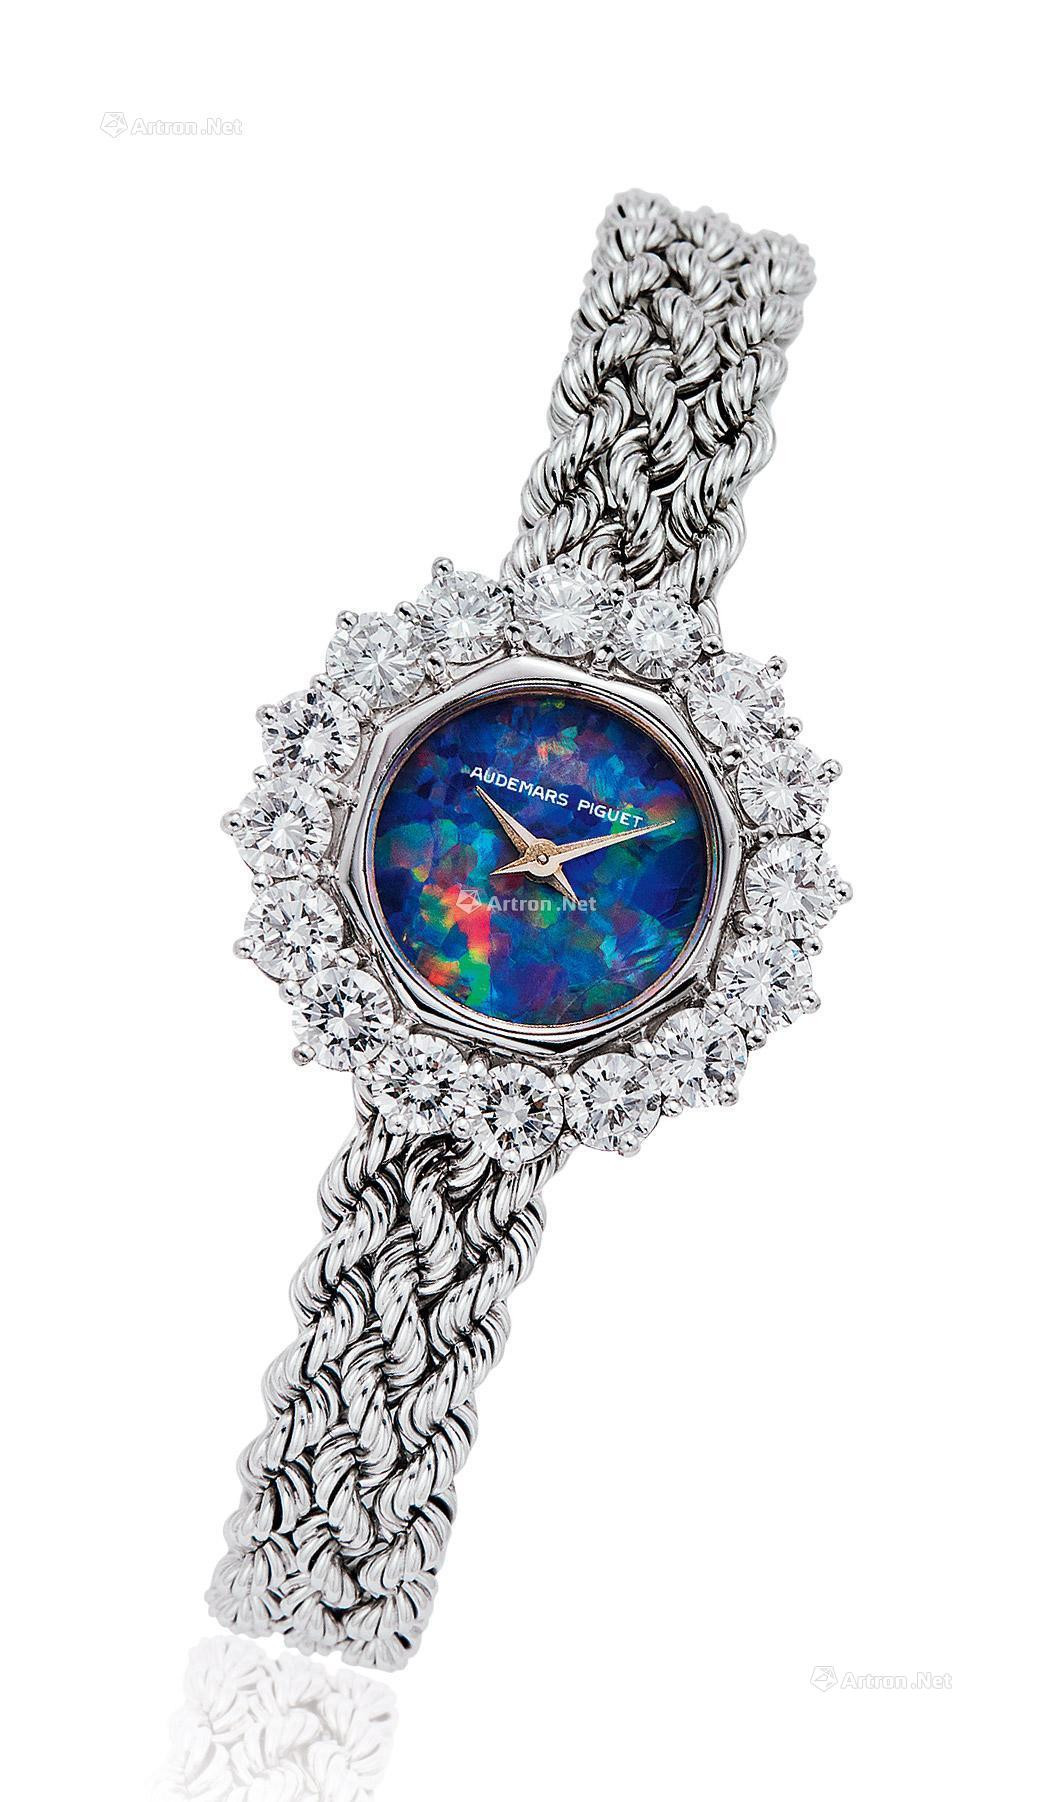 AUDEMARS PIGUET A LADY’S WHITE GOLD AND DIAMOND-SET MANUALLY-WOUND WRISTWATCH WITH OPAL DIAL